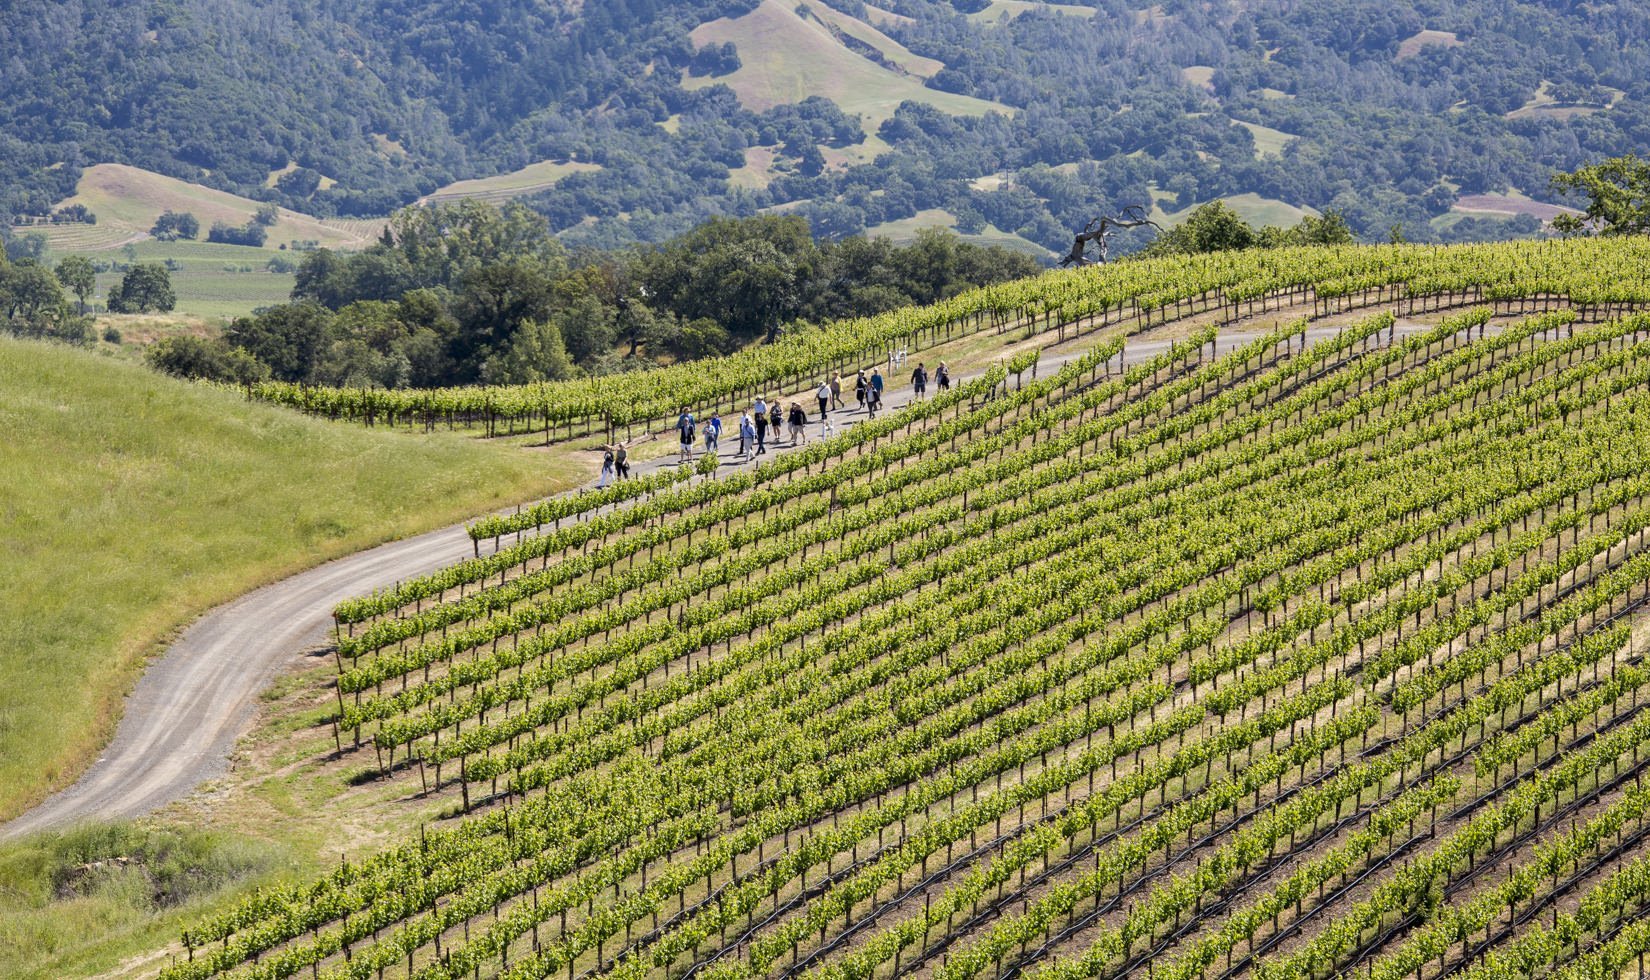 Guests walking along a path surrounded by vineyards on a Spring Vineyard Hike at Jordan Winery.